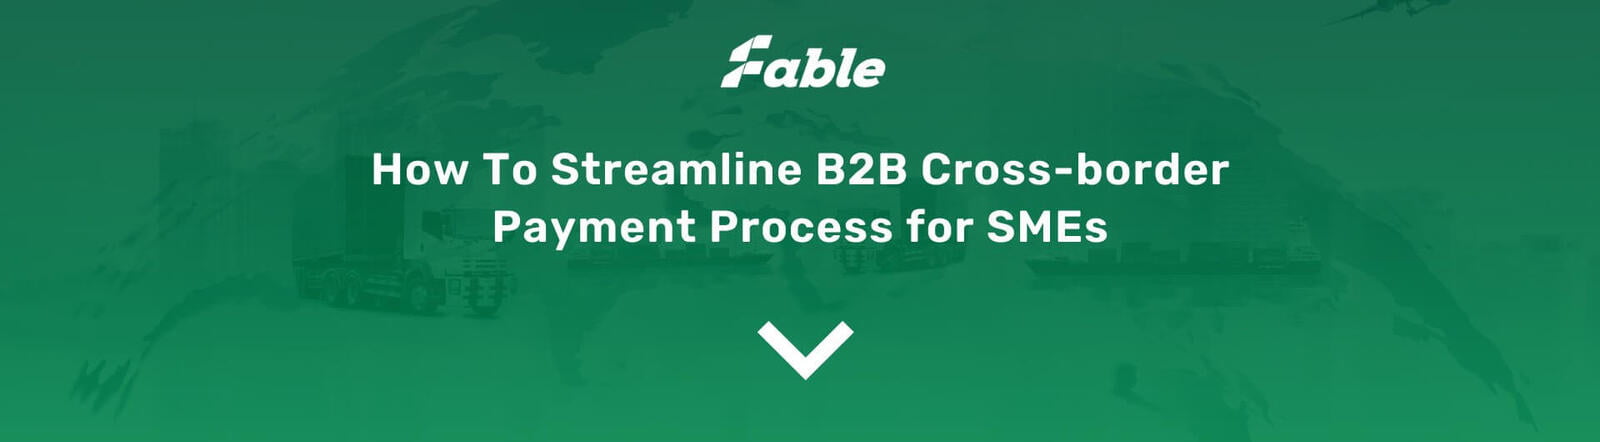 How To Streamline B2B Cross-border Payment Process for SMEs